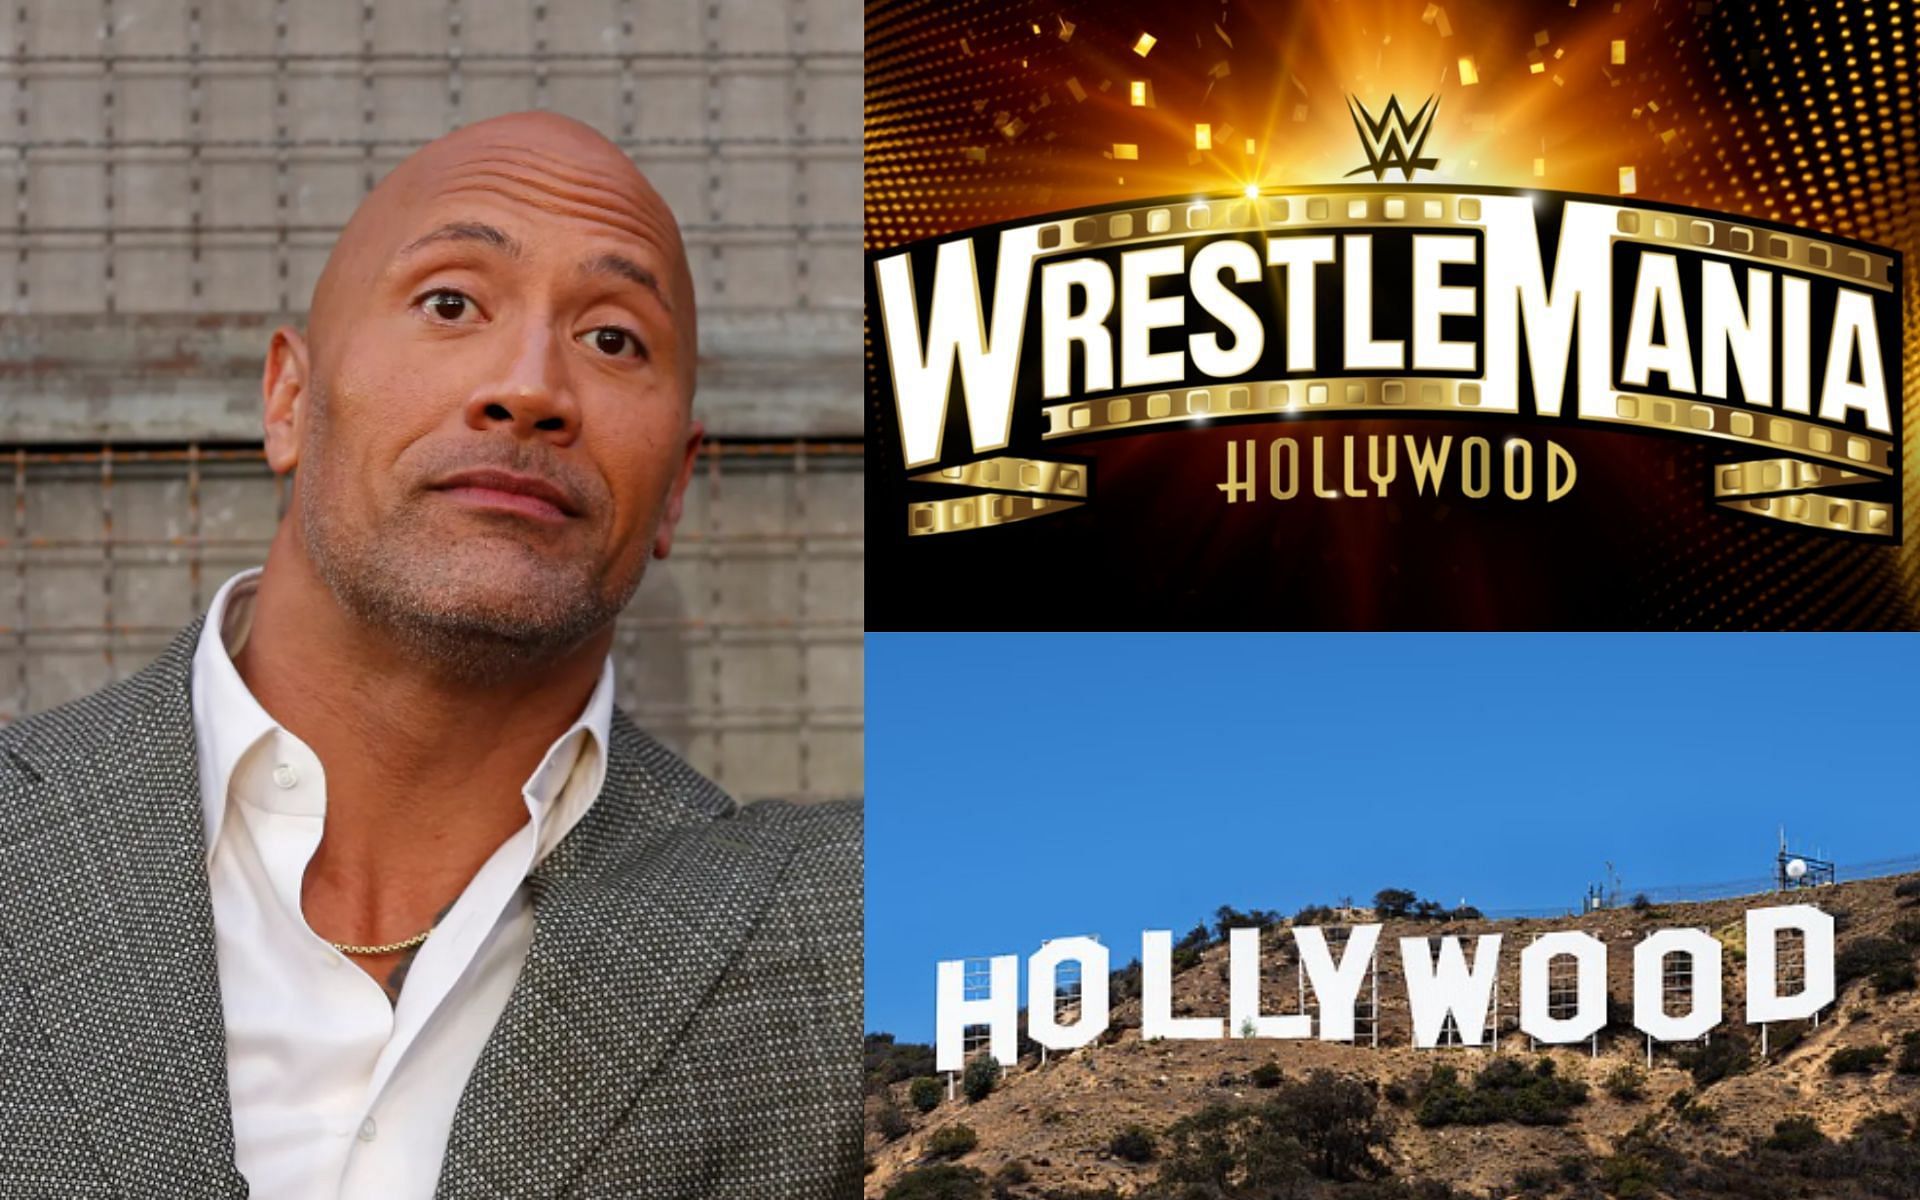 The Rock was initially speculated to face Roman Reigns at WrestleMania 39 